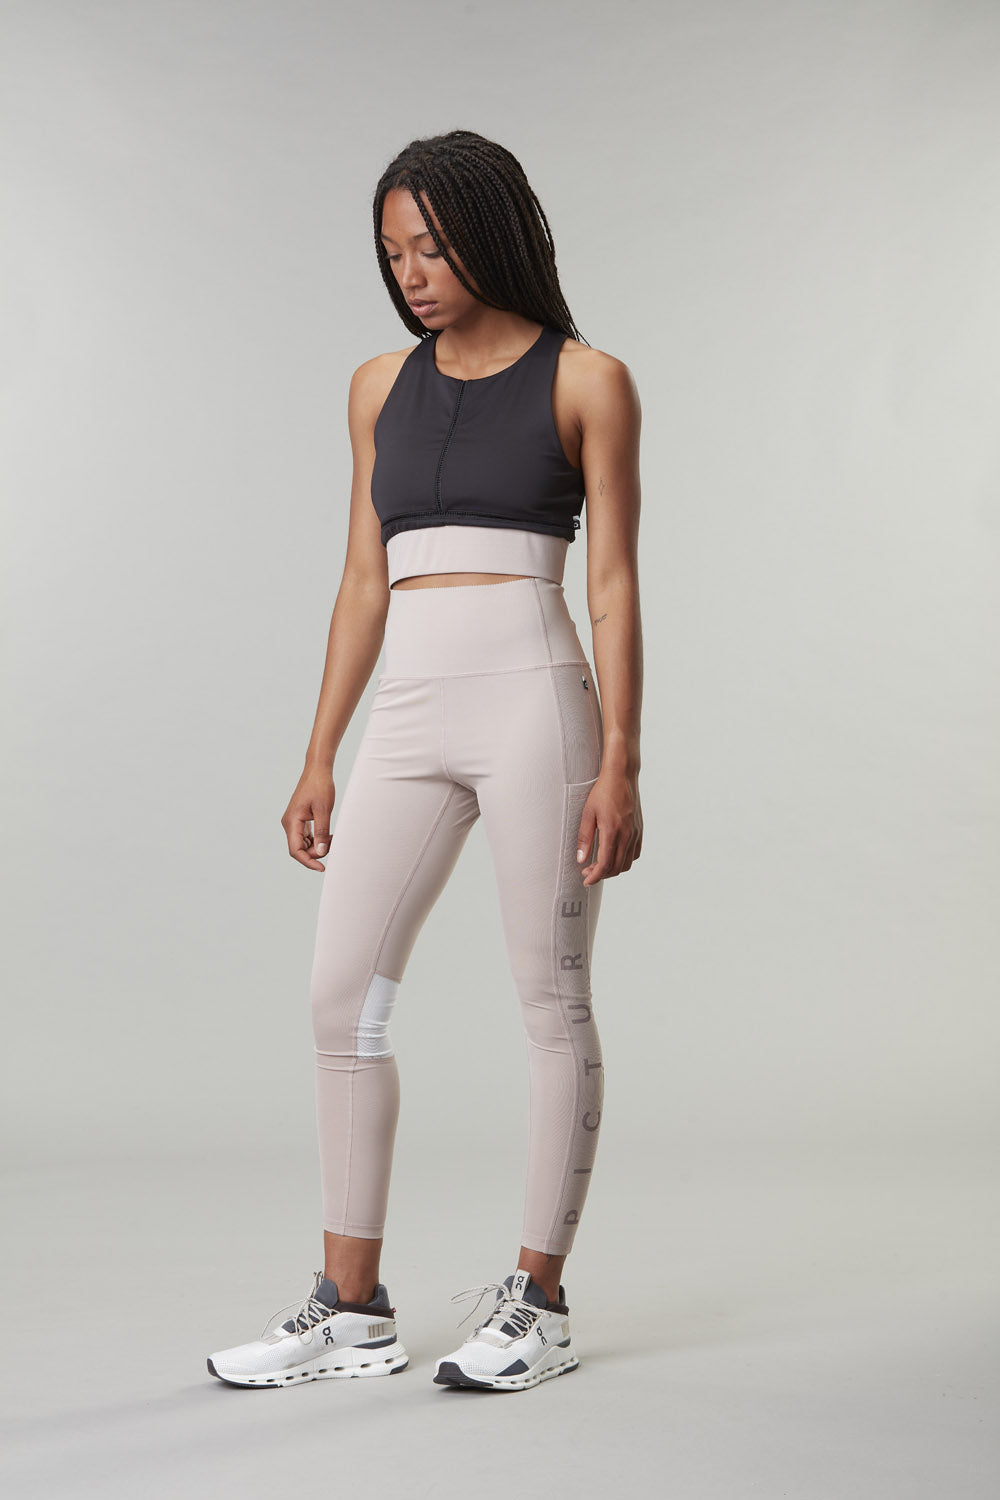 Picture Organic - W's Sanna Crop Top - Recycled Polyester - Weekendbee - sustainable sportswear